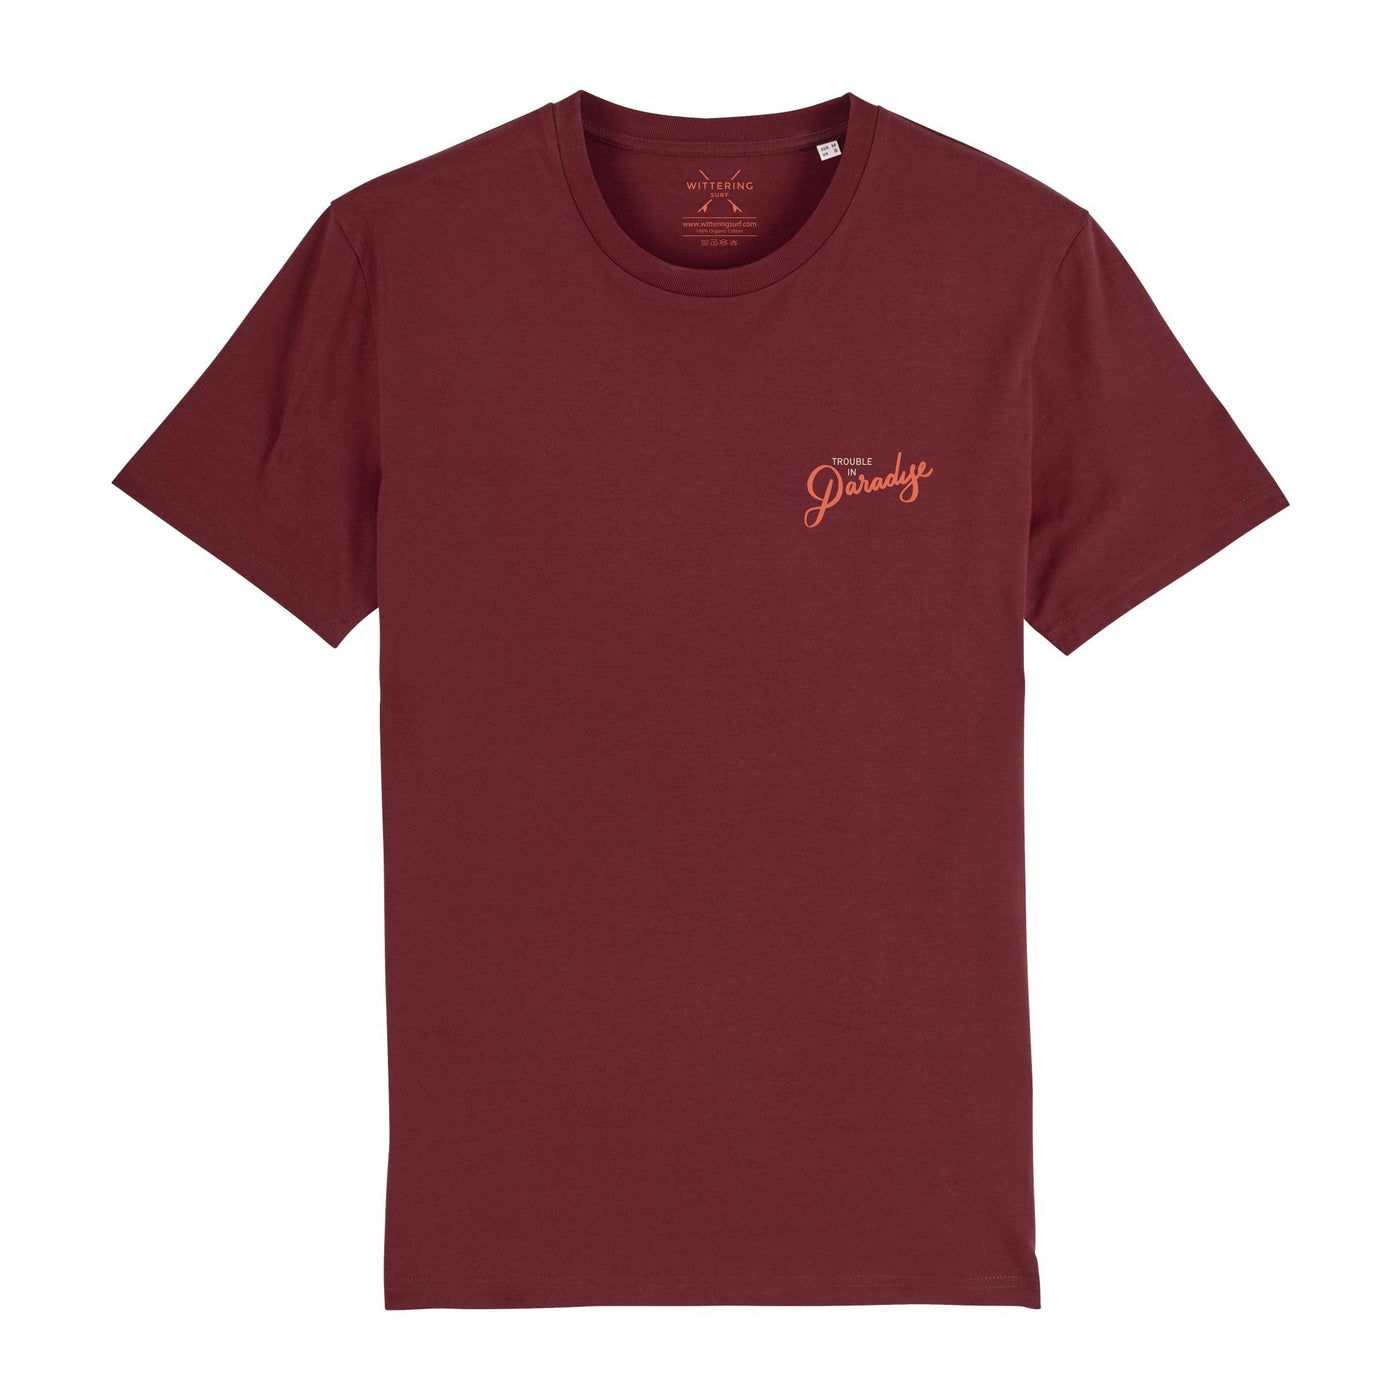 TROUBLE IN PARADISE MENS T-SHIRT - BURGUNDY